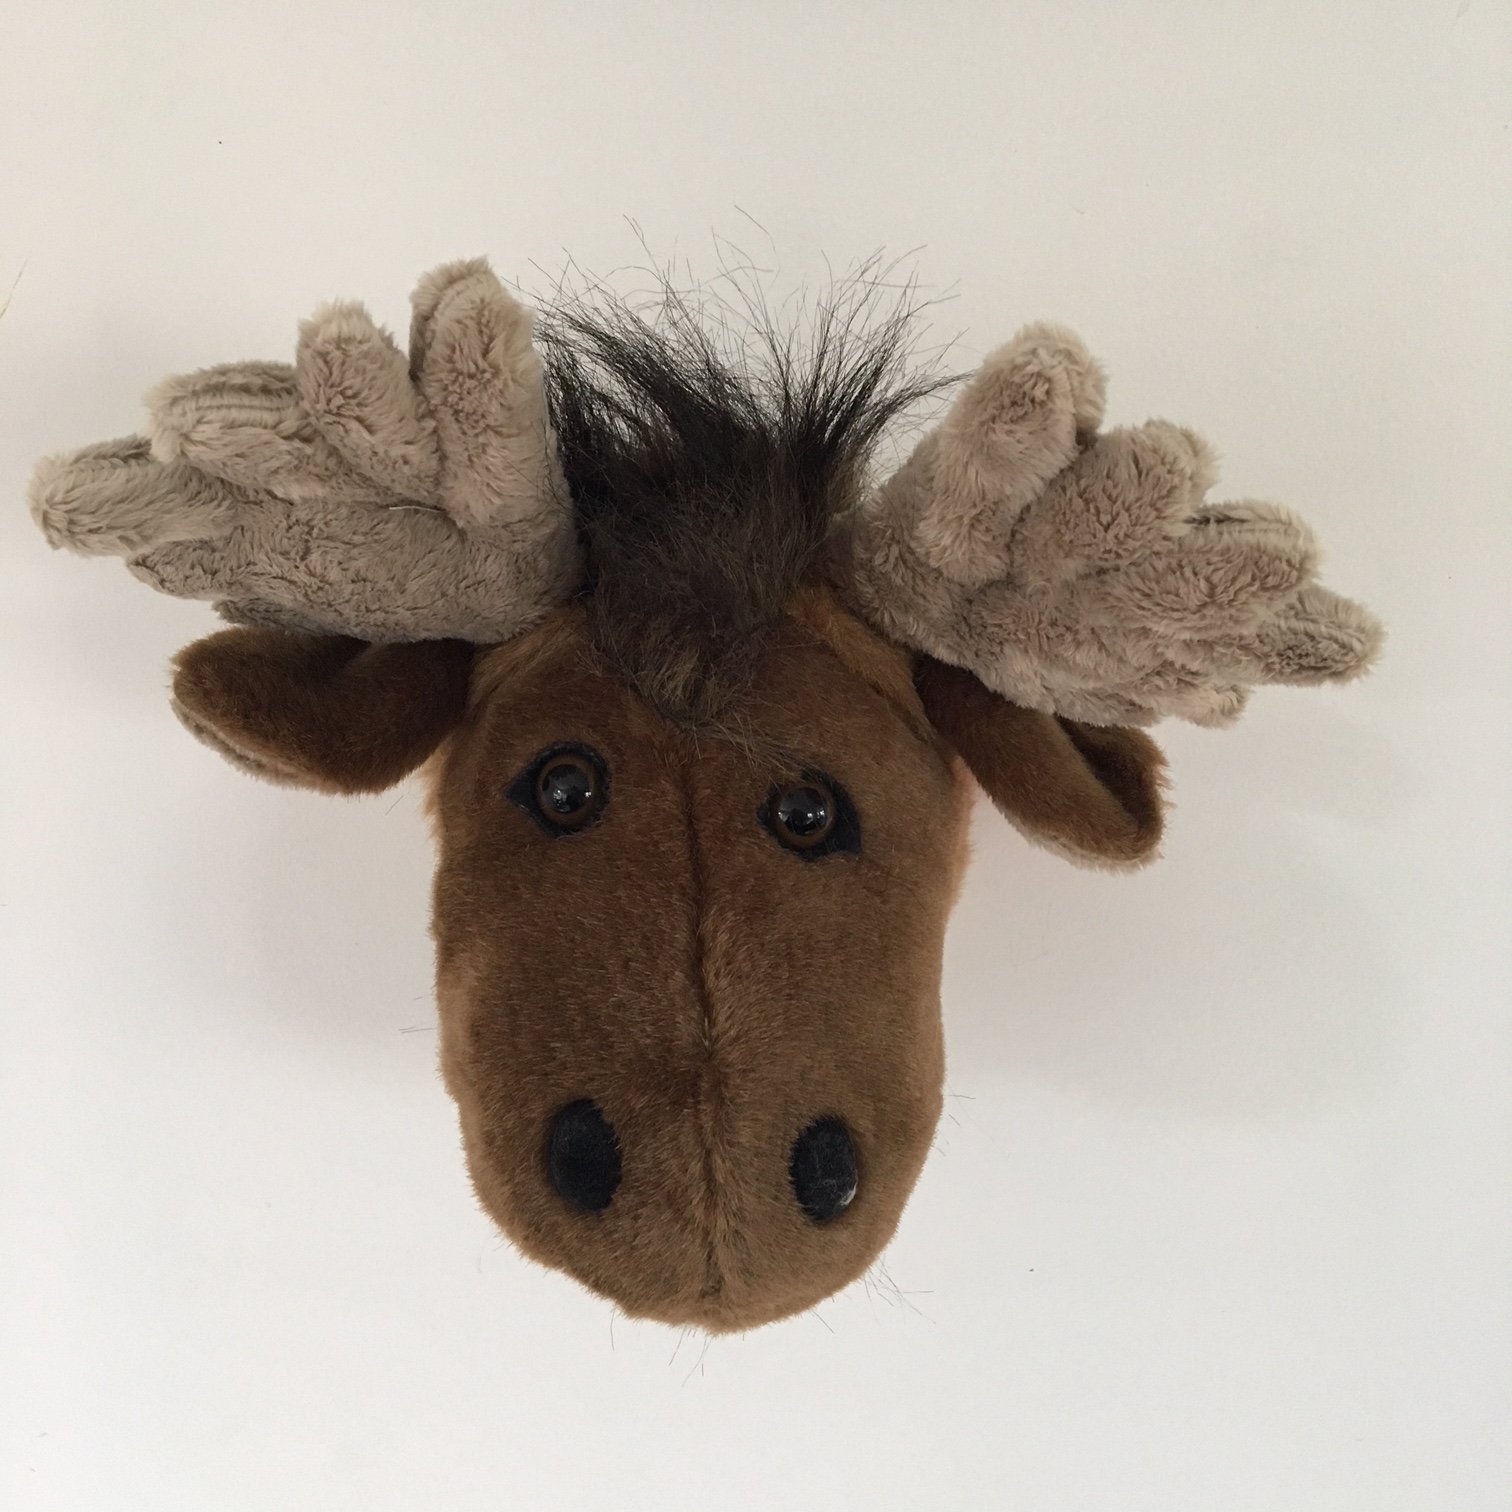 Plush Moose Trophy Head | American Log Cabin Style Decor and Bedding ...